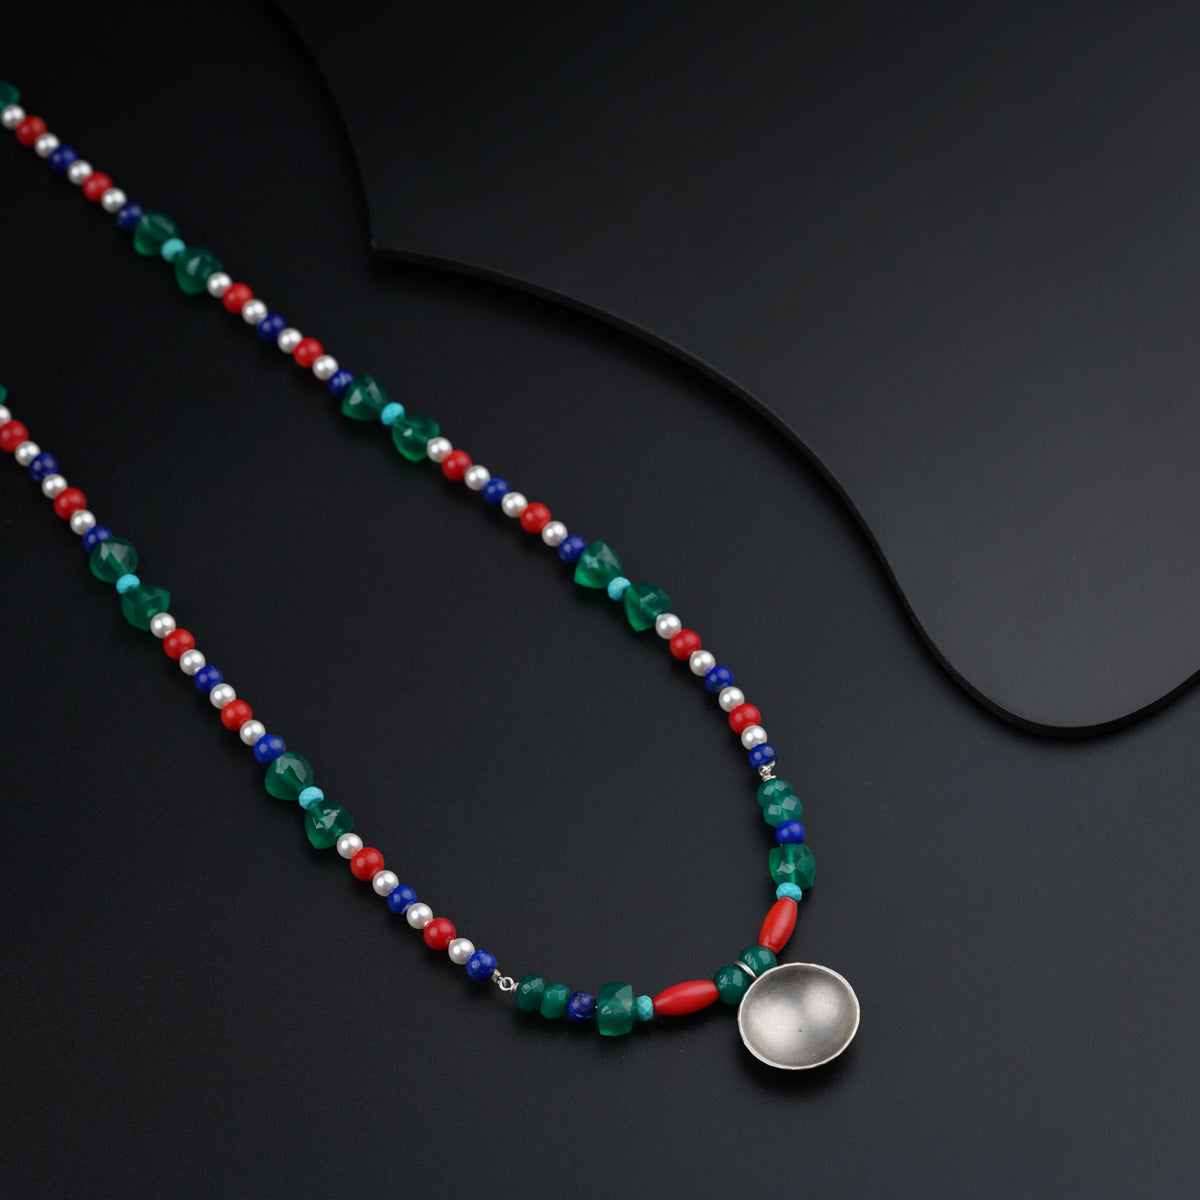 Long Necklace with Vatee Pendant and Semi Precious Stones